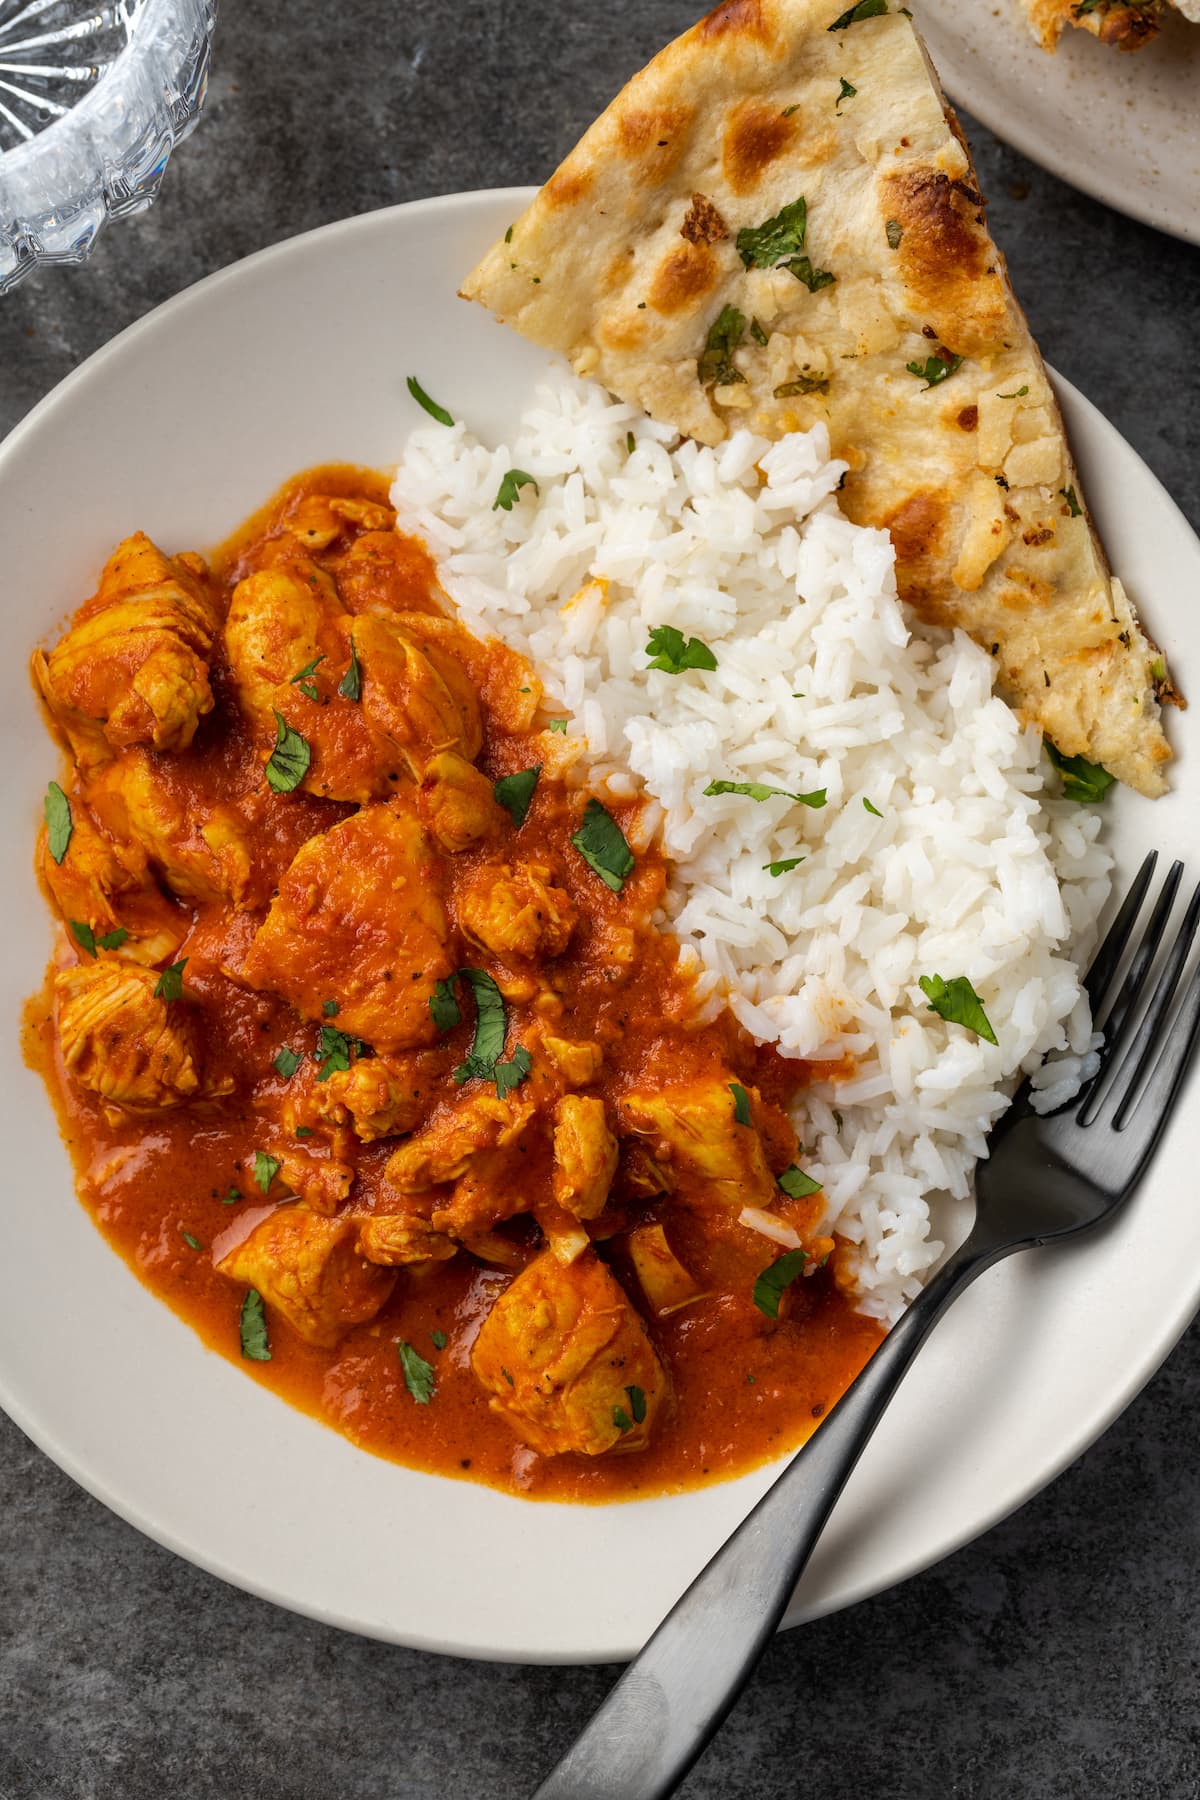 Overhead view of instant pot butter chicken served on a white plate next to a side of basmati rice and naan, garnished with fresh chopped cilantro.